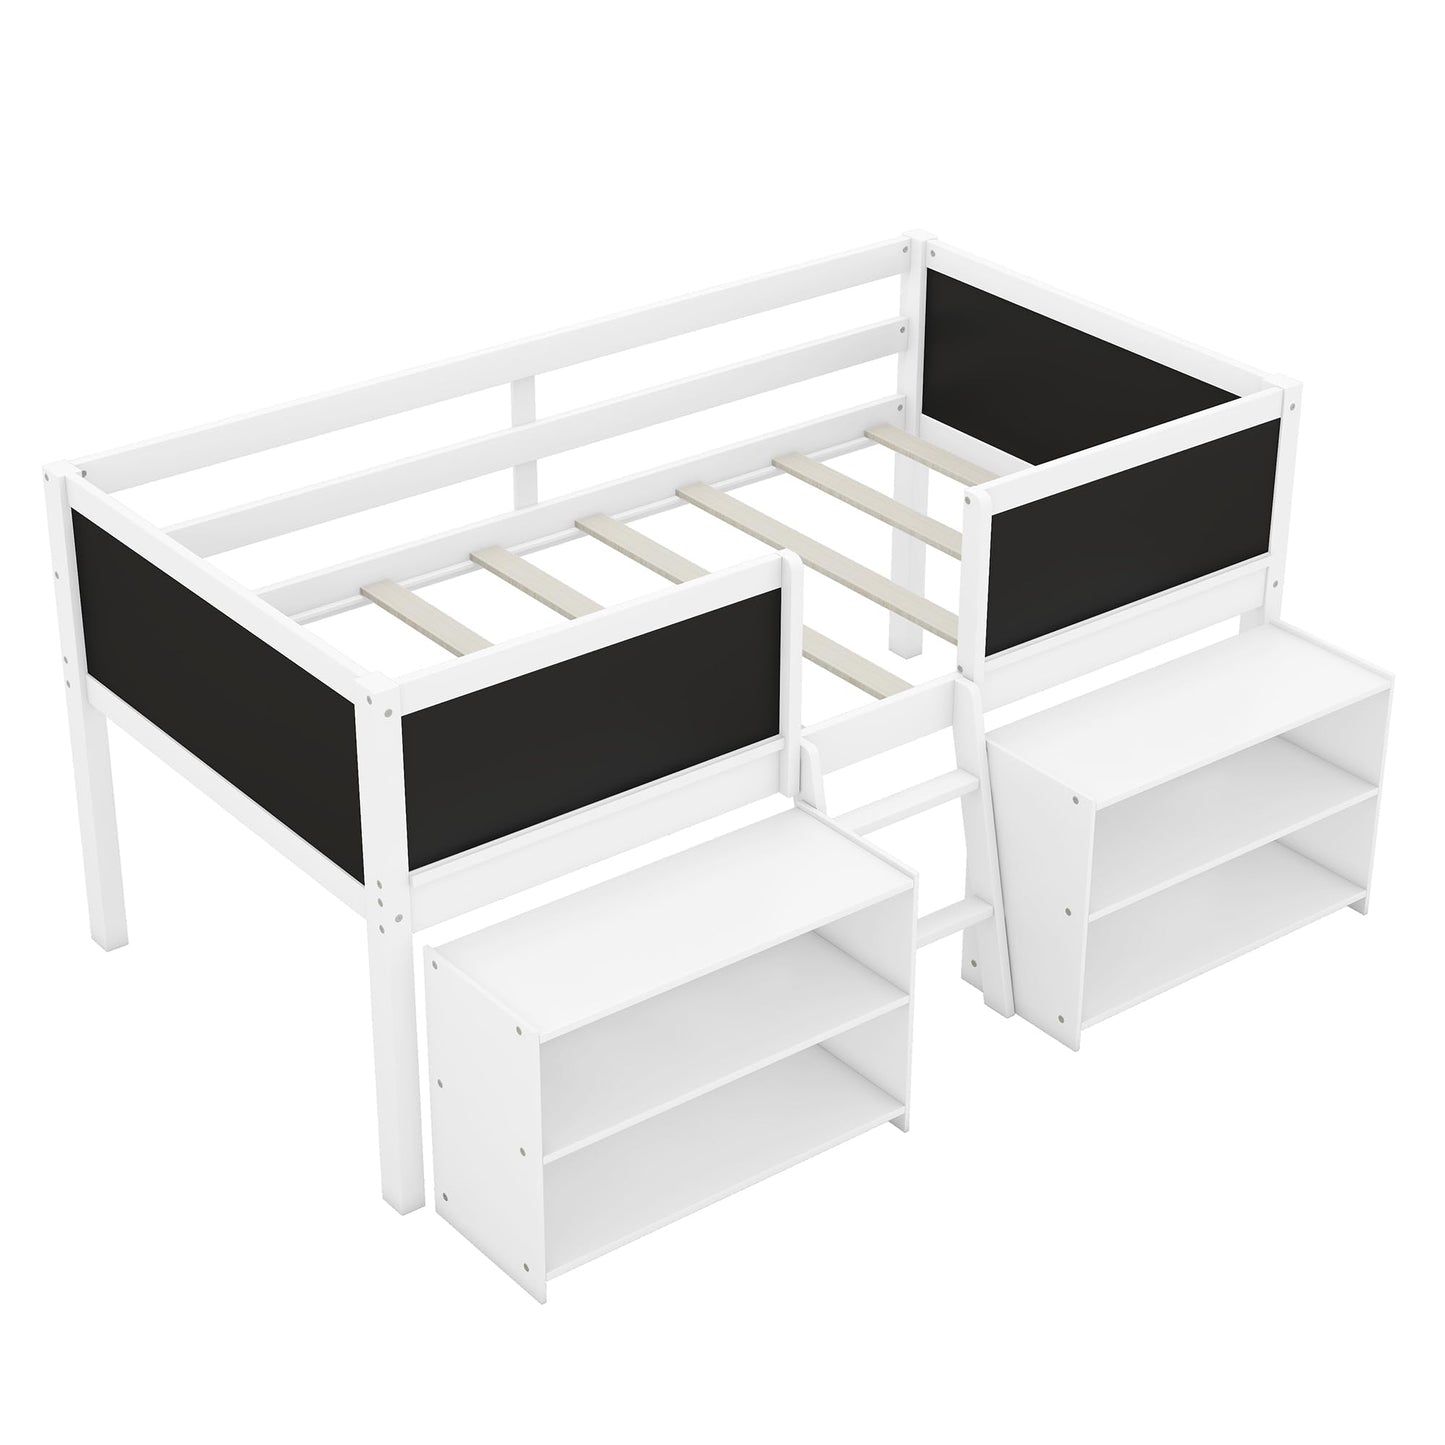 SOFTSEA Twin Size Low Loft Bed with Two Movable Shelves and Ladder, Wooden Loft Bed with Decorative Guardrail and Chalkboard for Kids, Whtie